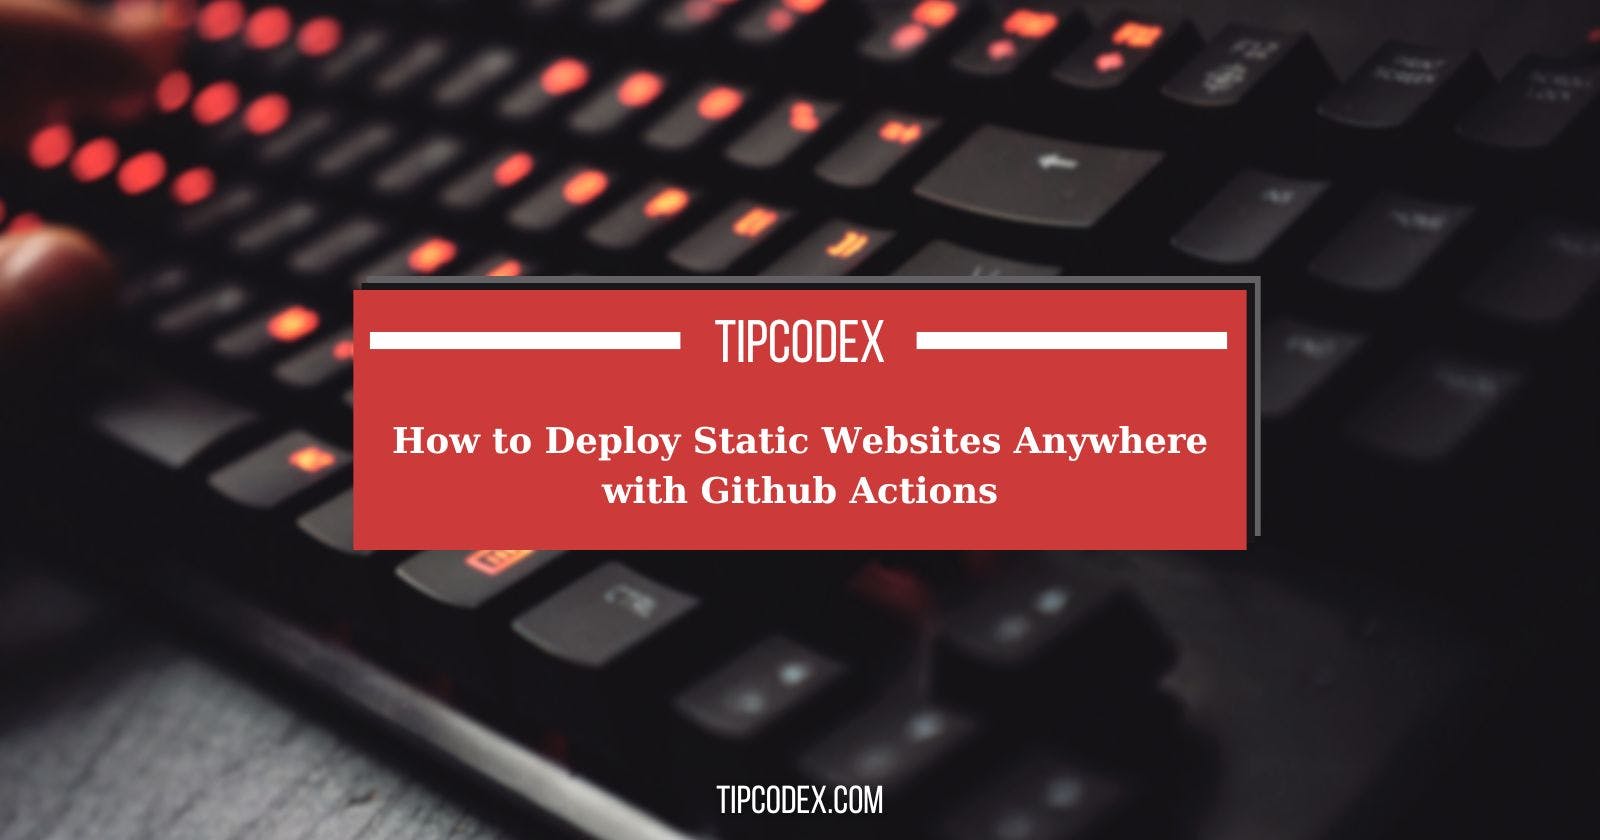 How to Deploy Static Websites Anywhere with Github Actions